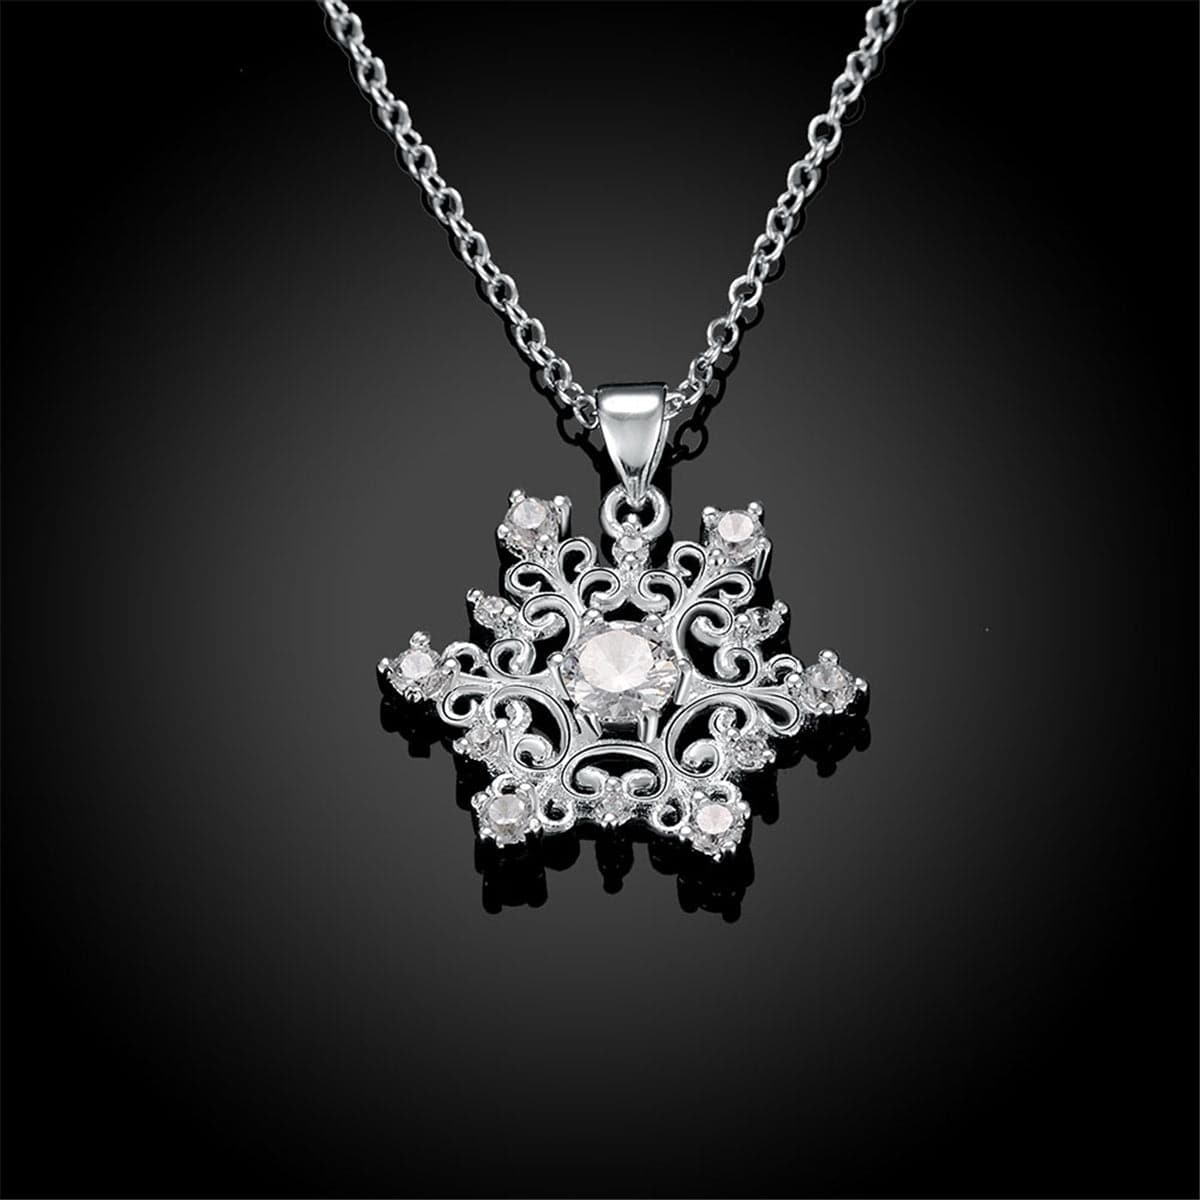 White Cubic Zirconia & Silver-Plated Snowflake Pendant Necklace - streetregion